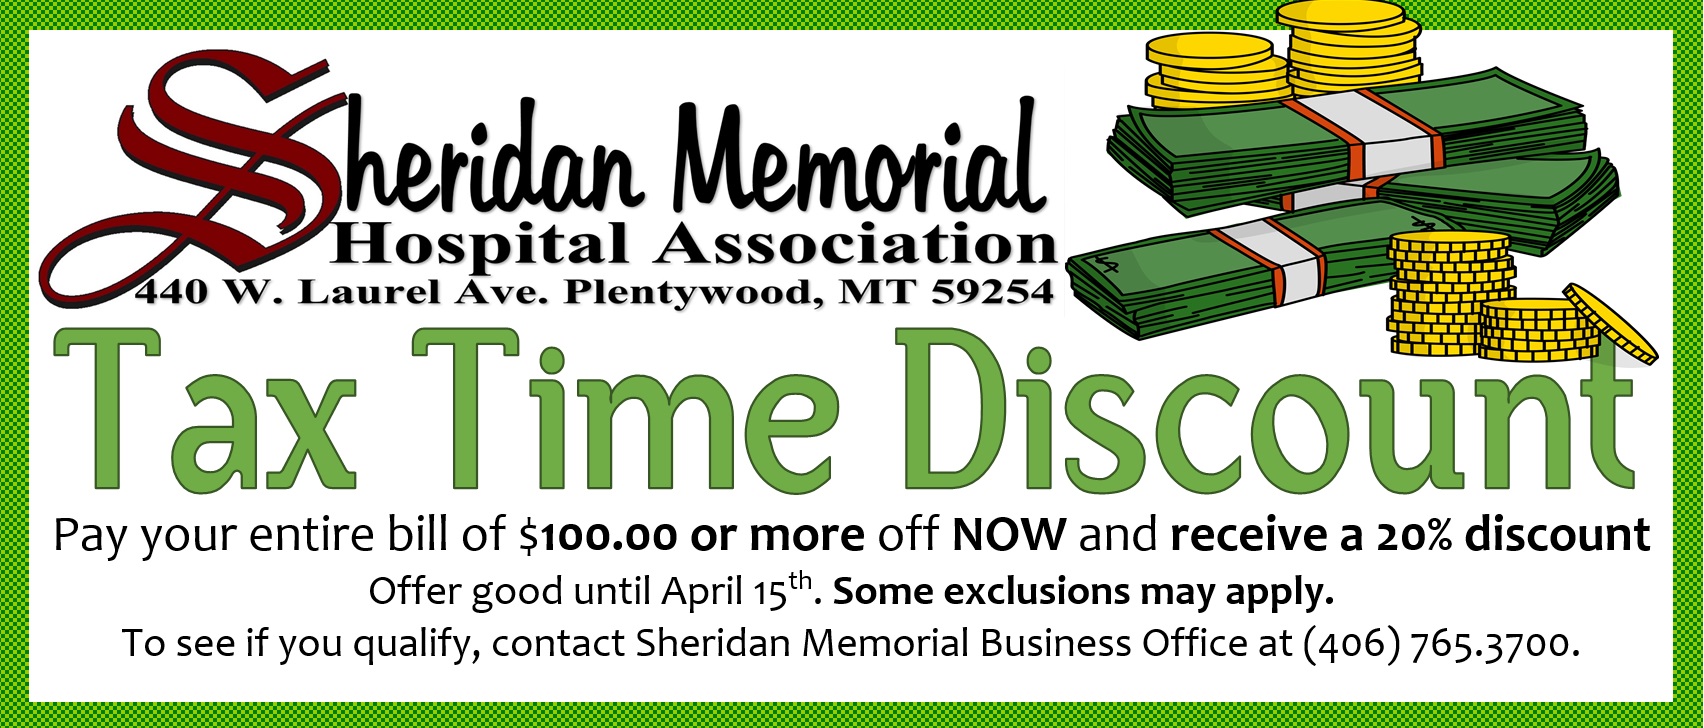 Sheridan Memorial Hospital Association
440 W. Laurel Ave. Plentywood, MT 59254

Tax Time Discount
Pay your entire bill of $100.oo or more off NOW and receive a 20% discount
offer good until April 15th. Some exclusions may apply.
To see if you qualify, contact Sheridan Memorial Business Office at (406) 765.3700.